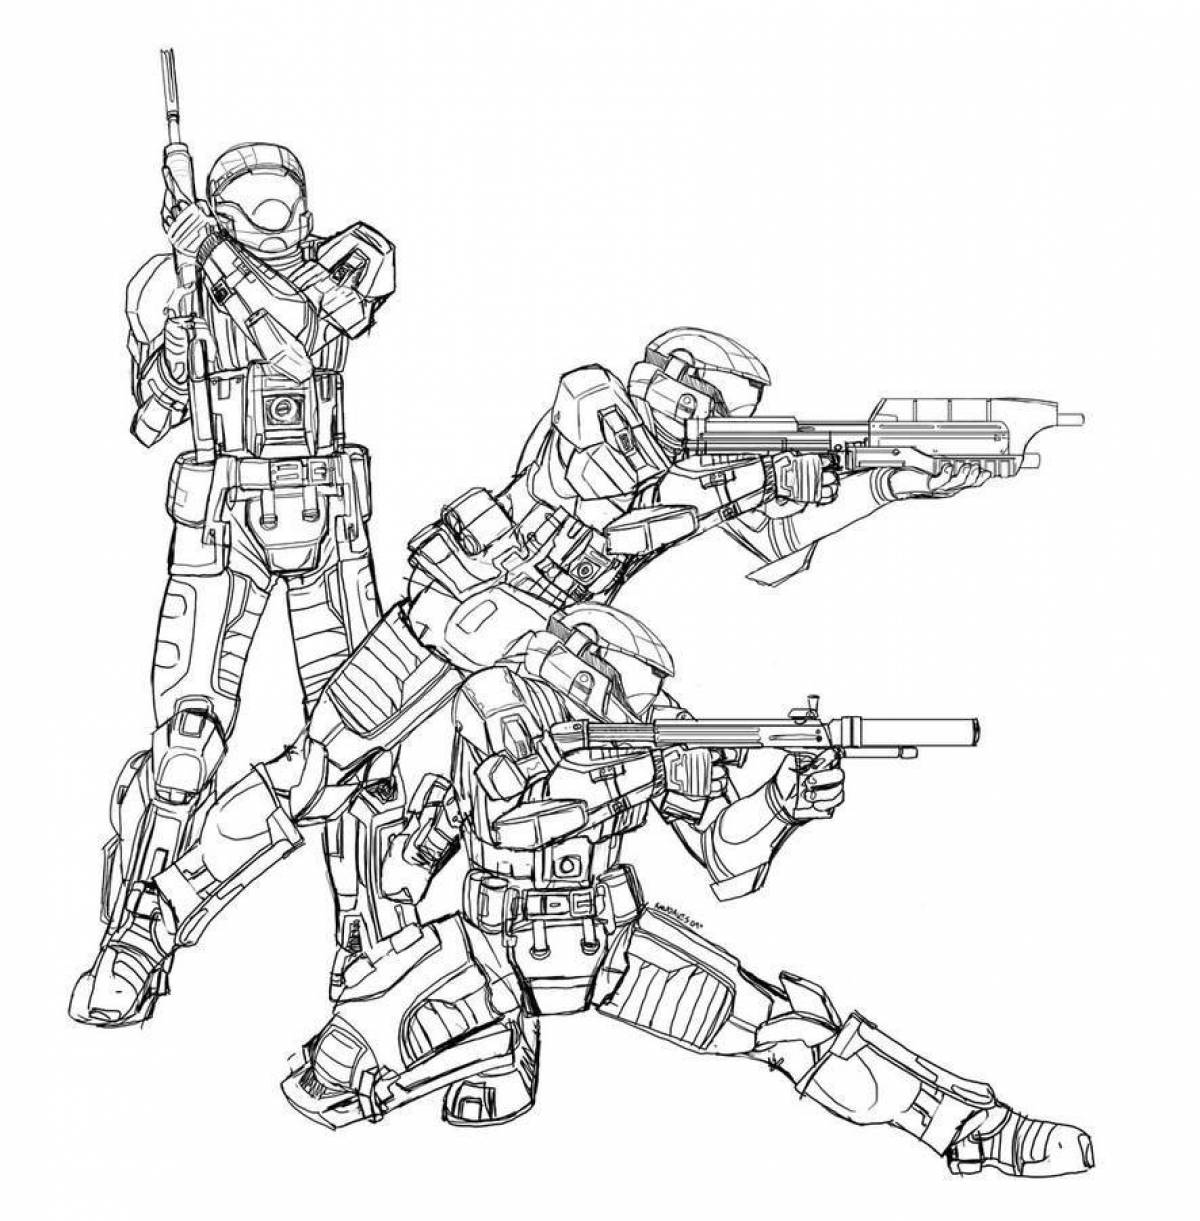 Grand standoff 2 coloring page